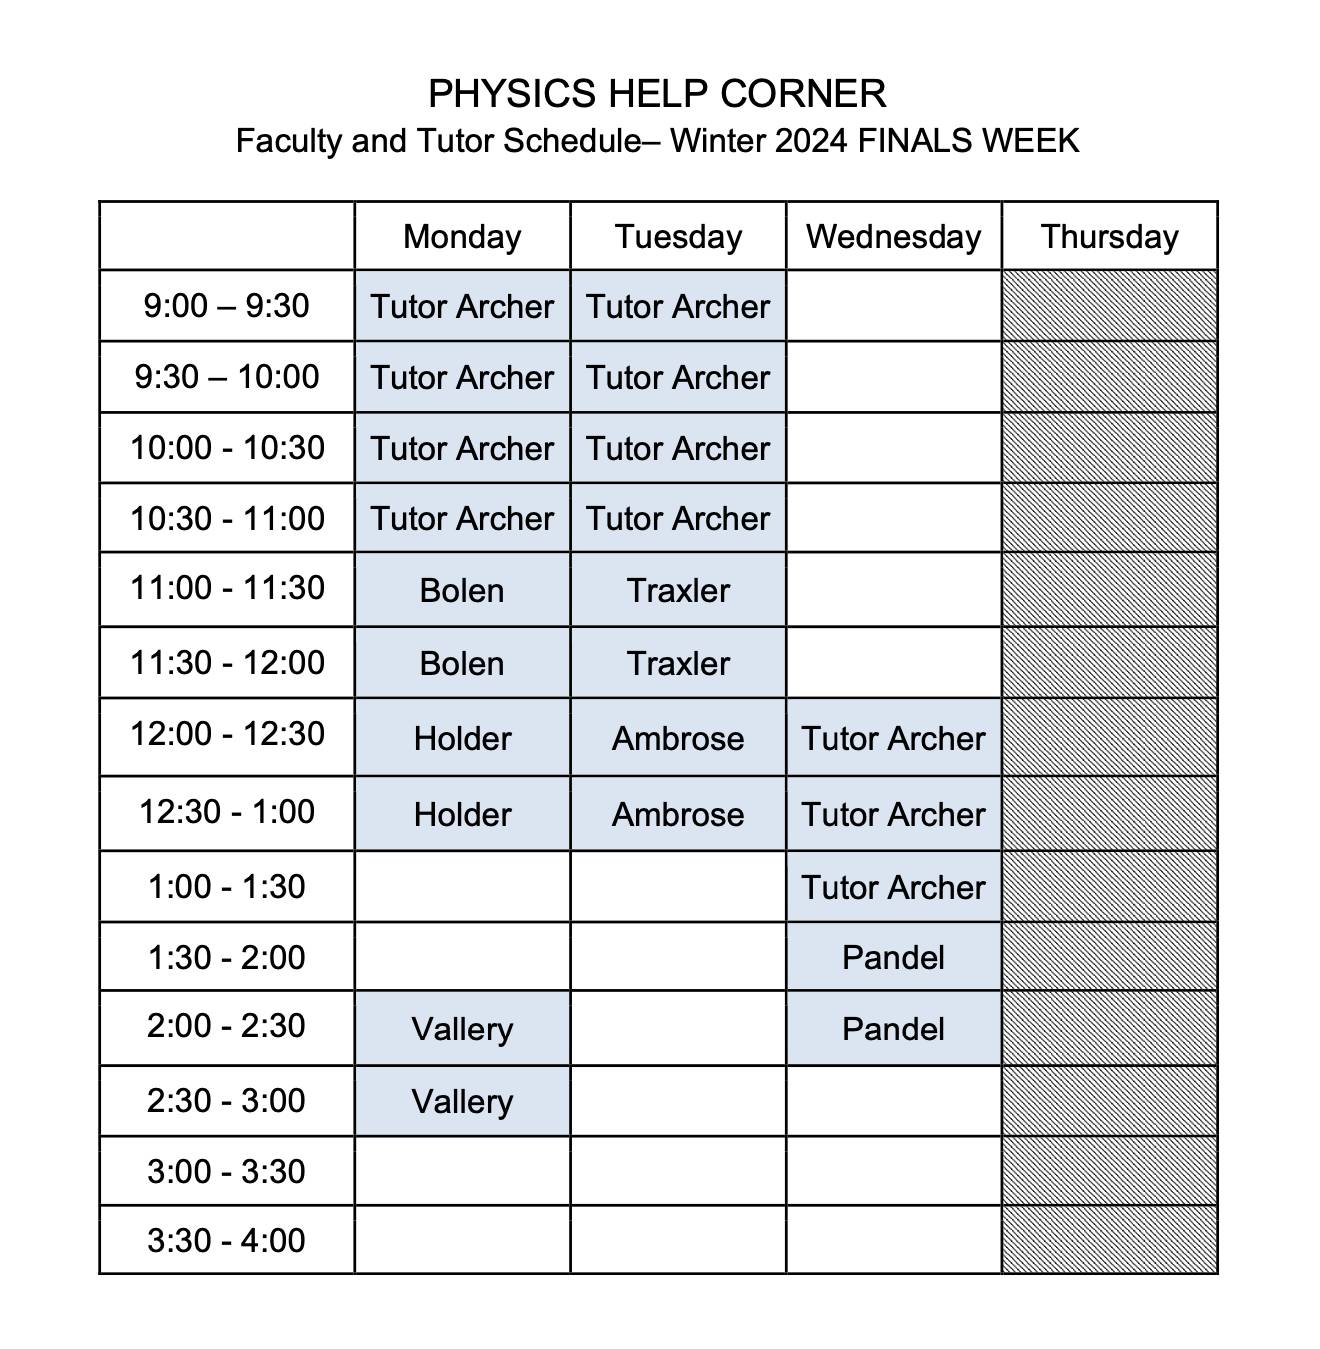 Weekly schedule for the physics help corner during finals week W2024